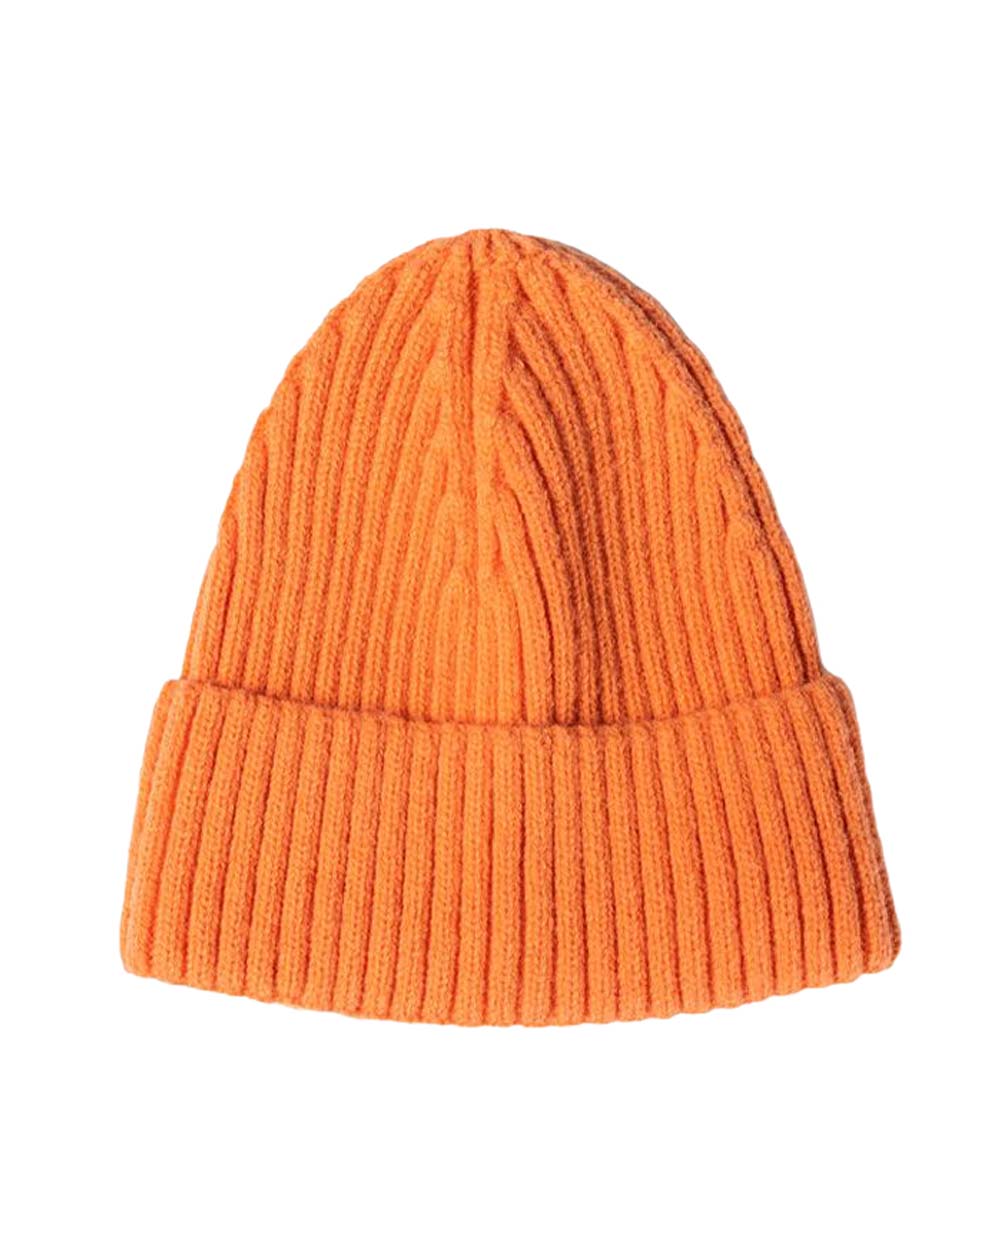 Ribbed Cashmere Blend Beanie in Apricot